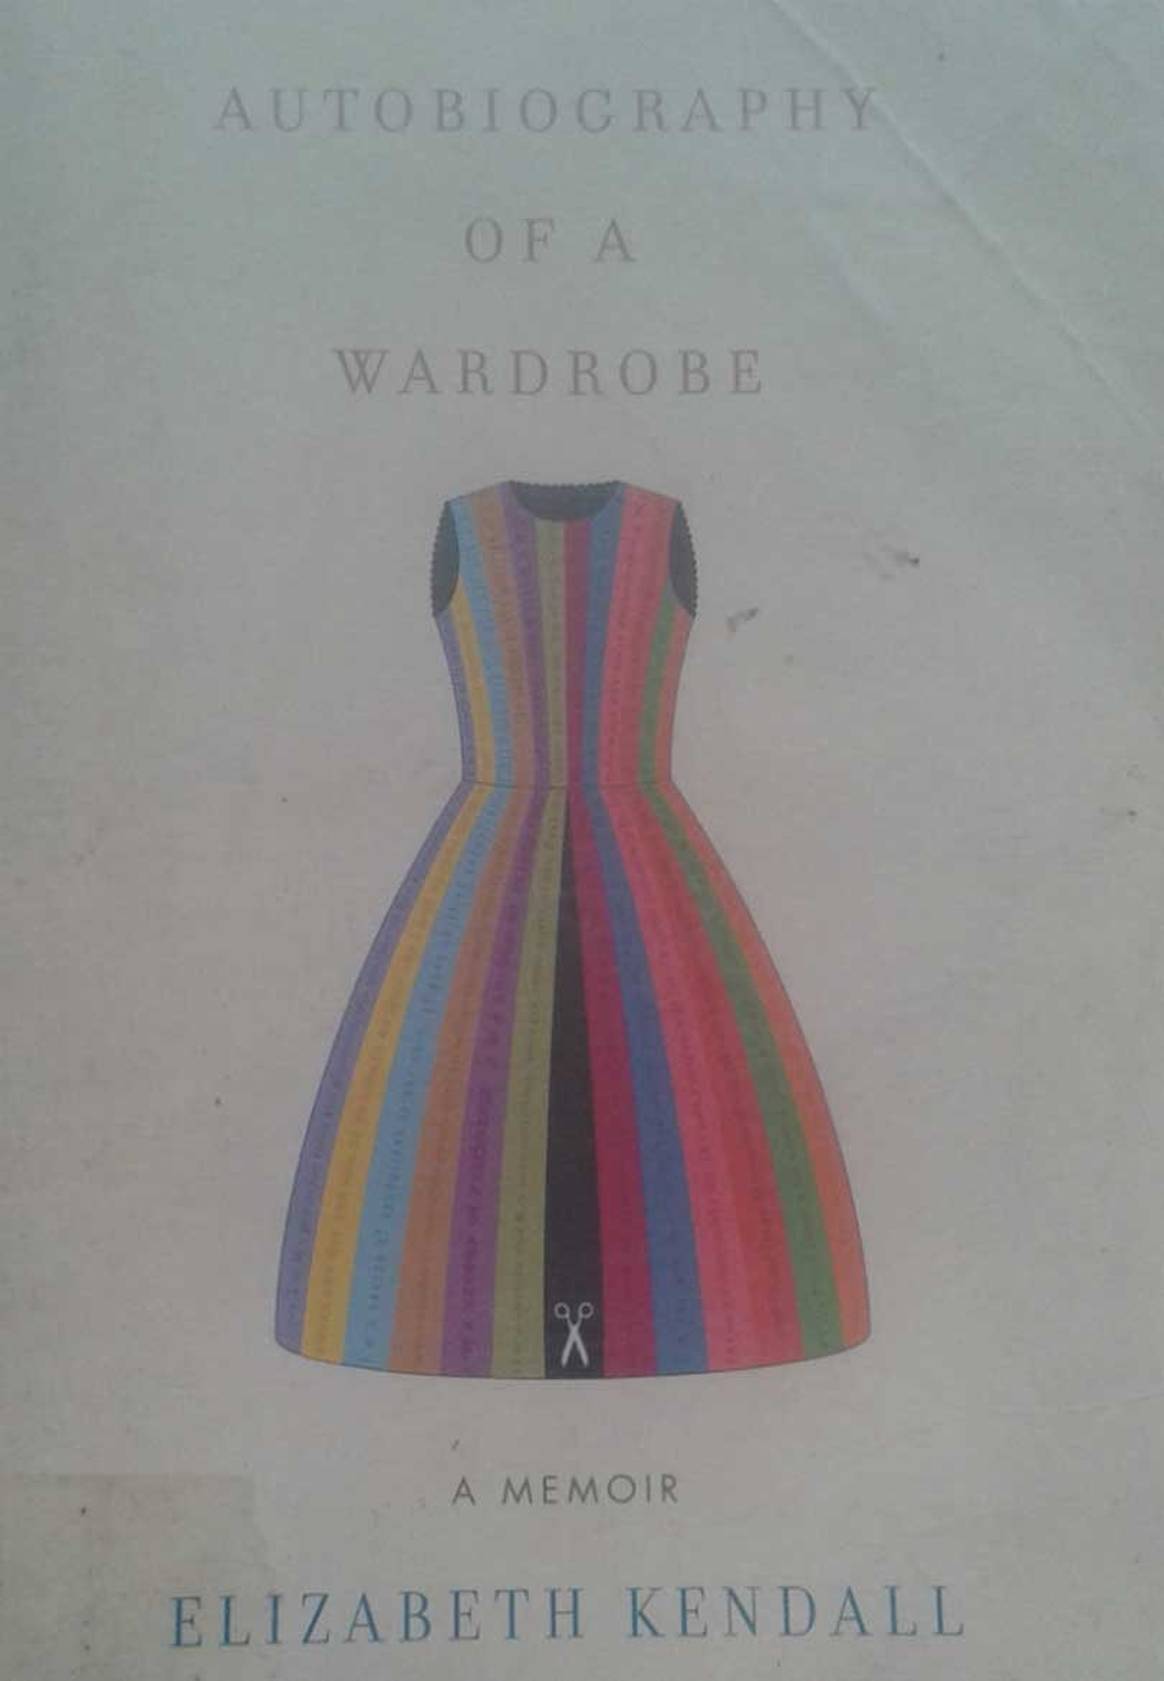 Must read: Autobiography of a Wardrobe